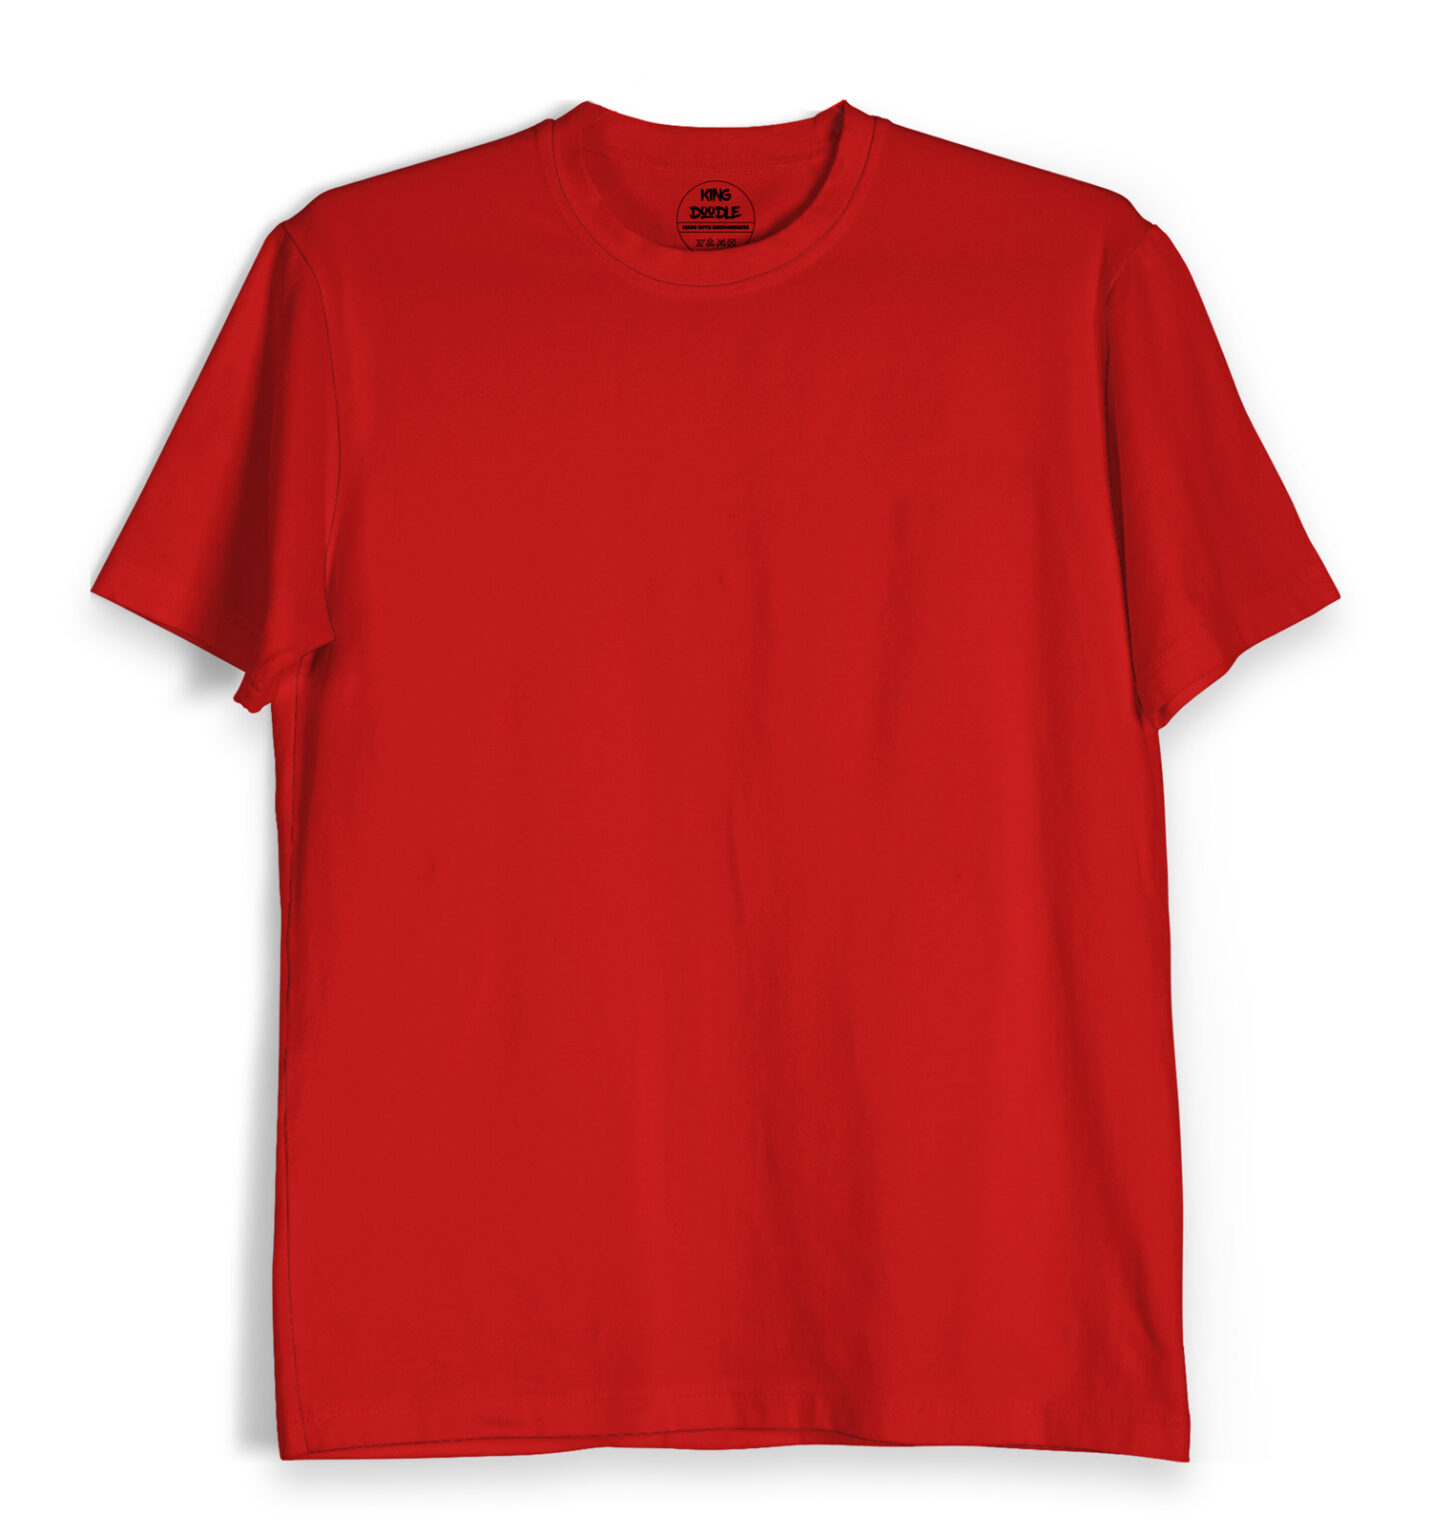 Solid red t-shirt